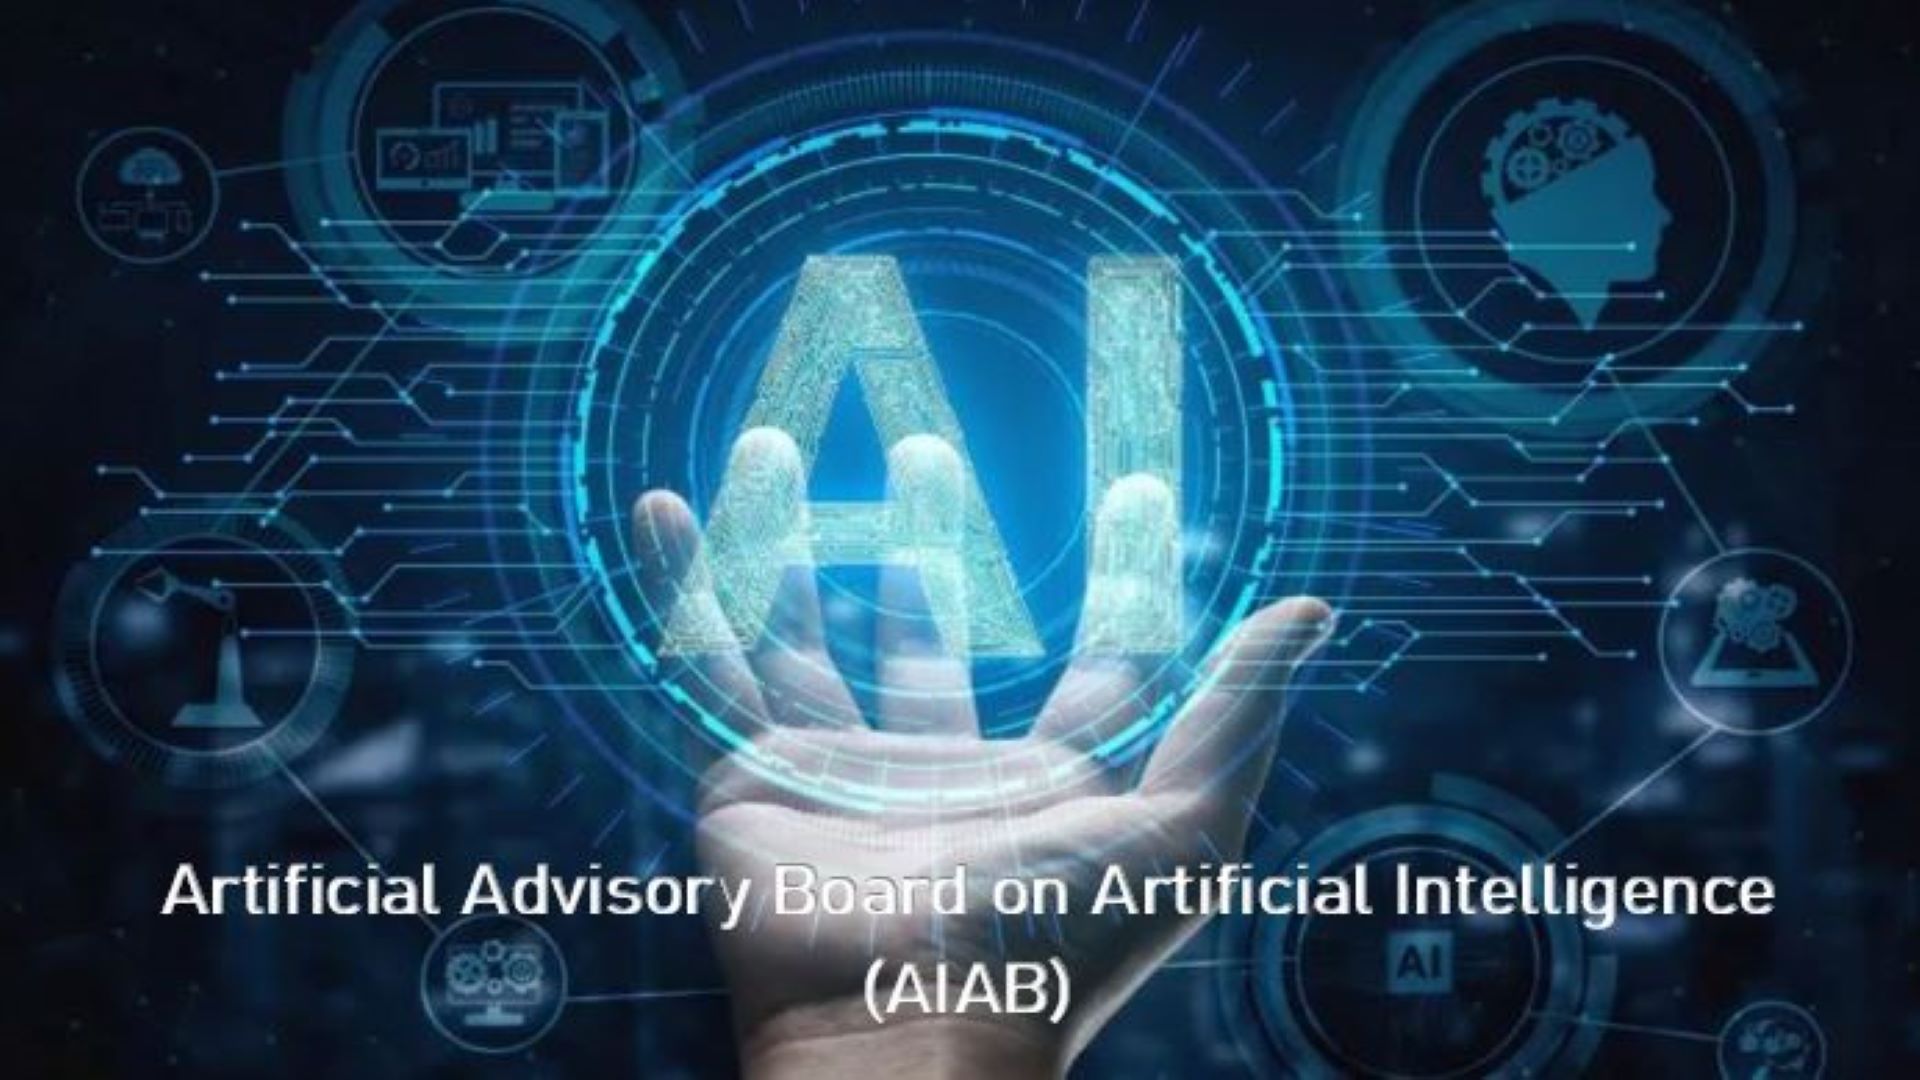 Towards a better application of the CEPEJ Ethical Charter on Artificial Intelligence